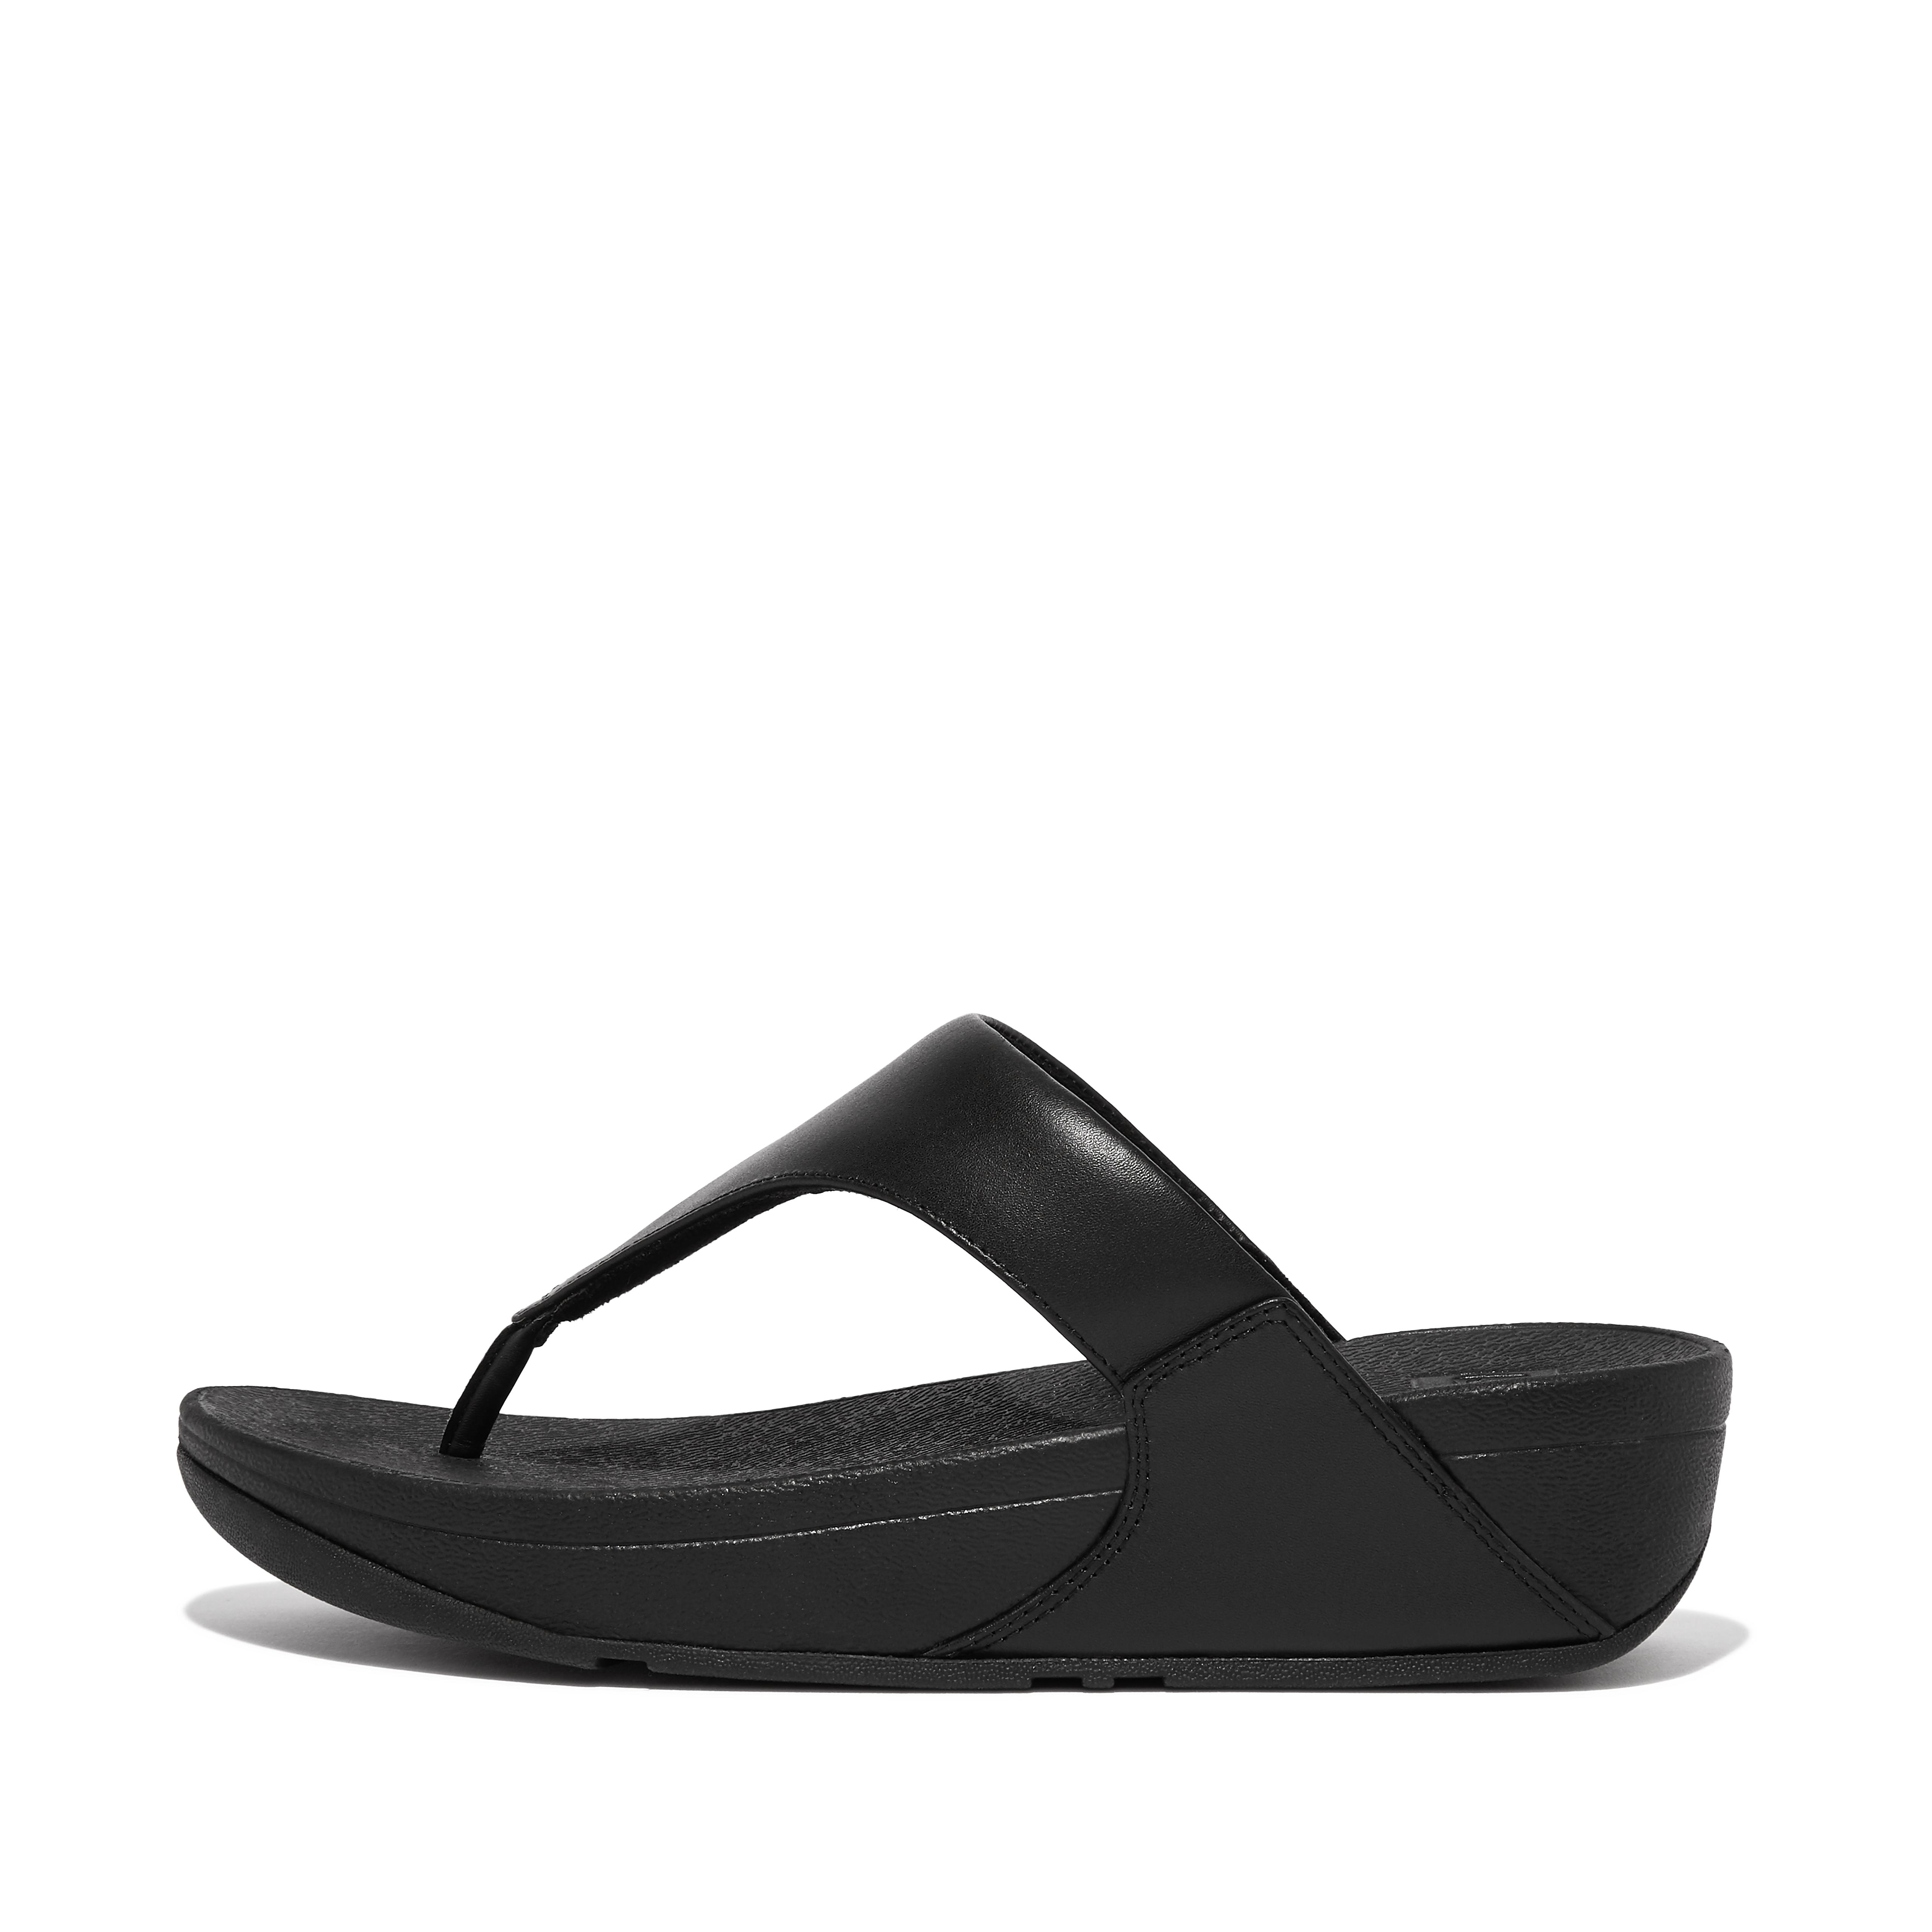 Justitie Banzai lobby Women's Online Outlet | FitFlop US